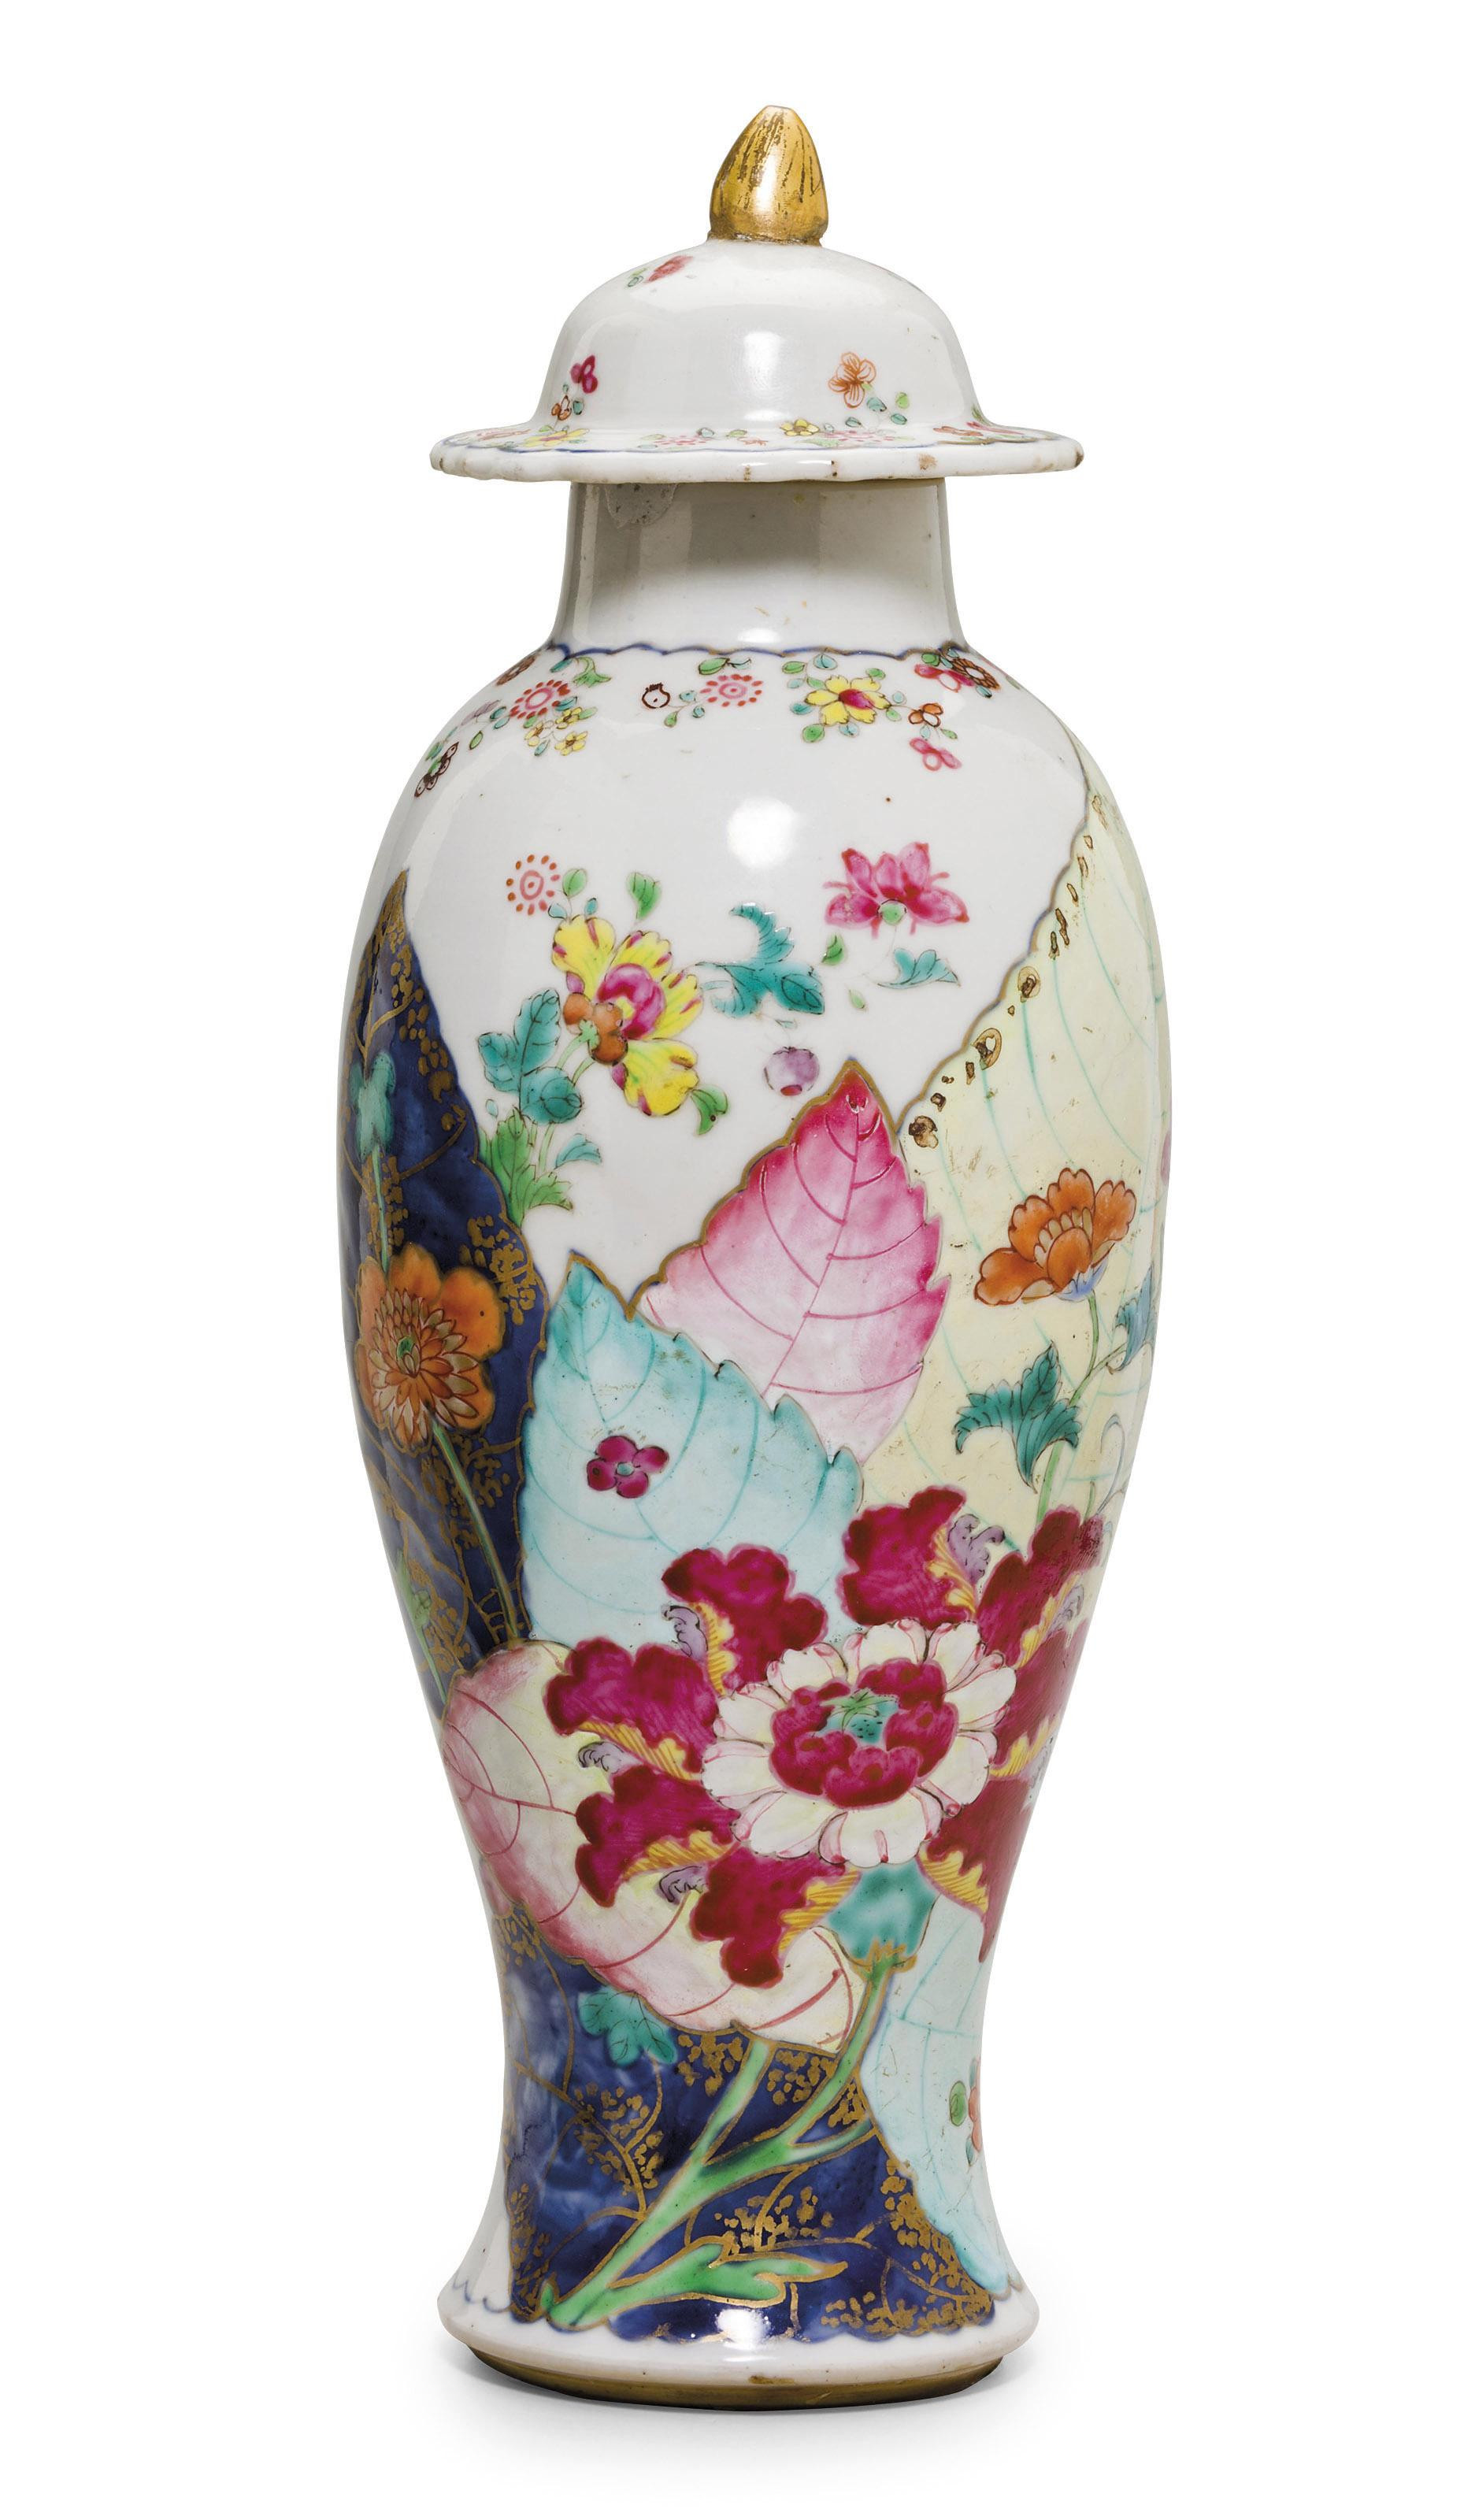 24 Fashionable tobacco Leaf Vase 2024 free download tobacco leaf vase of a famille rose tobacco leaf vase and cover qianlong period 1736 in a famille rose tobacco leaf vase and cover qianlong period 1736 1795 christies